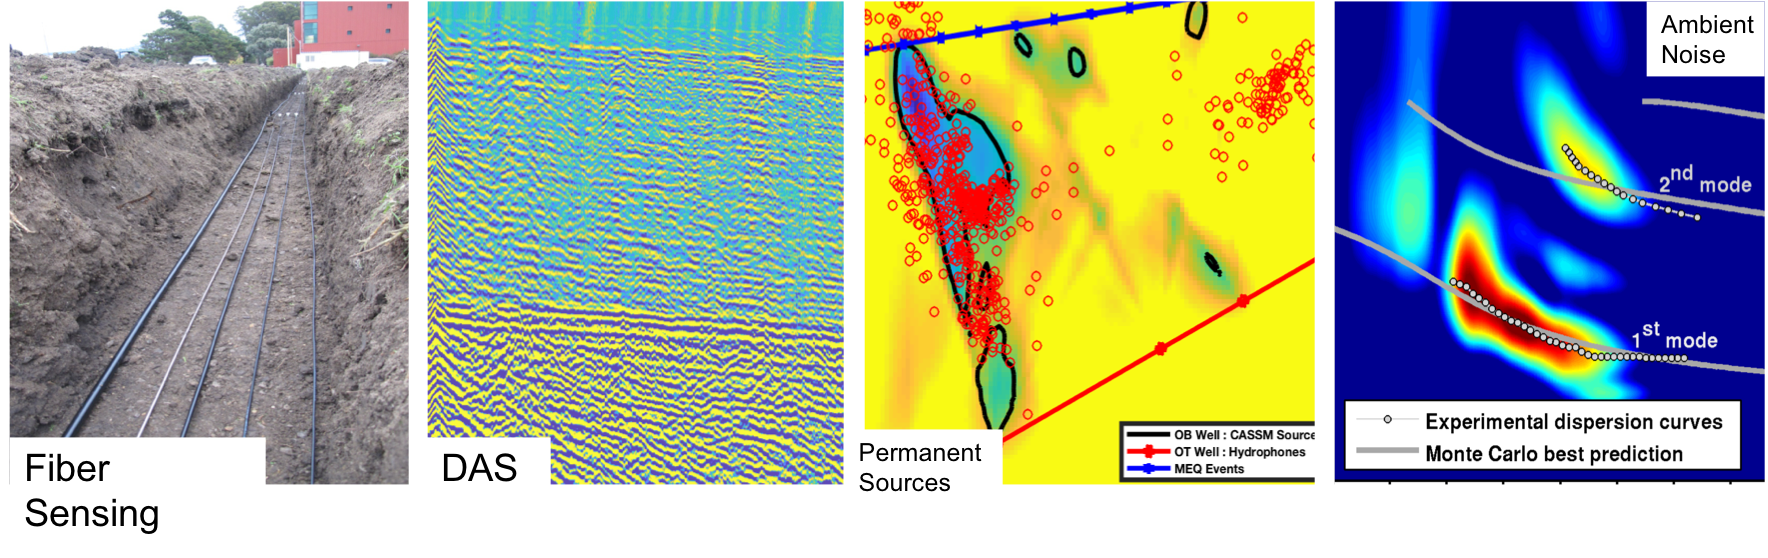 four images of differing sets of geophysical data